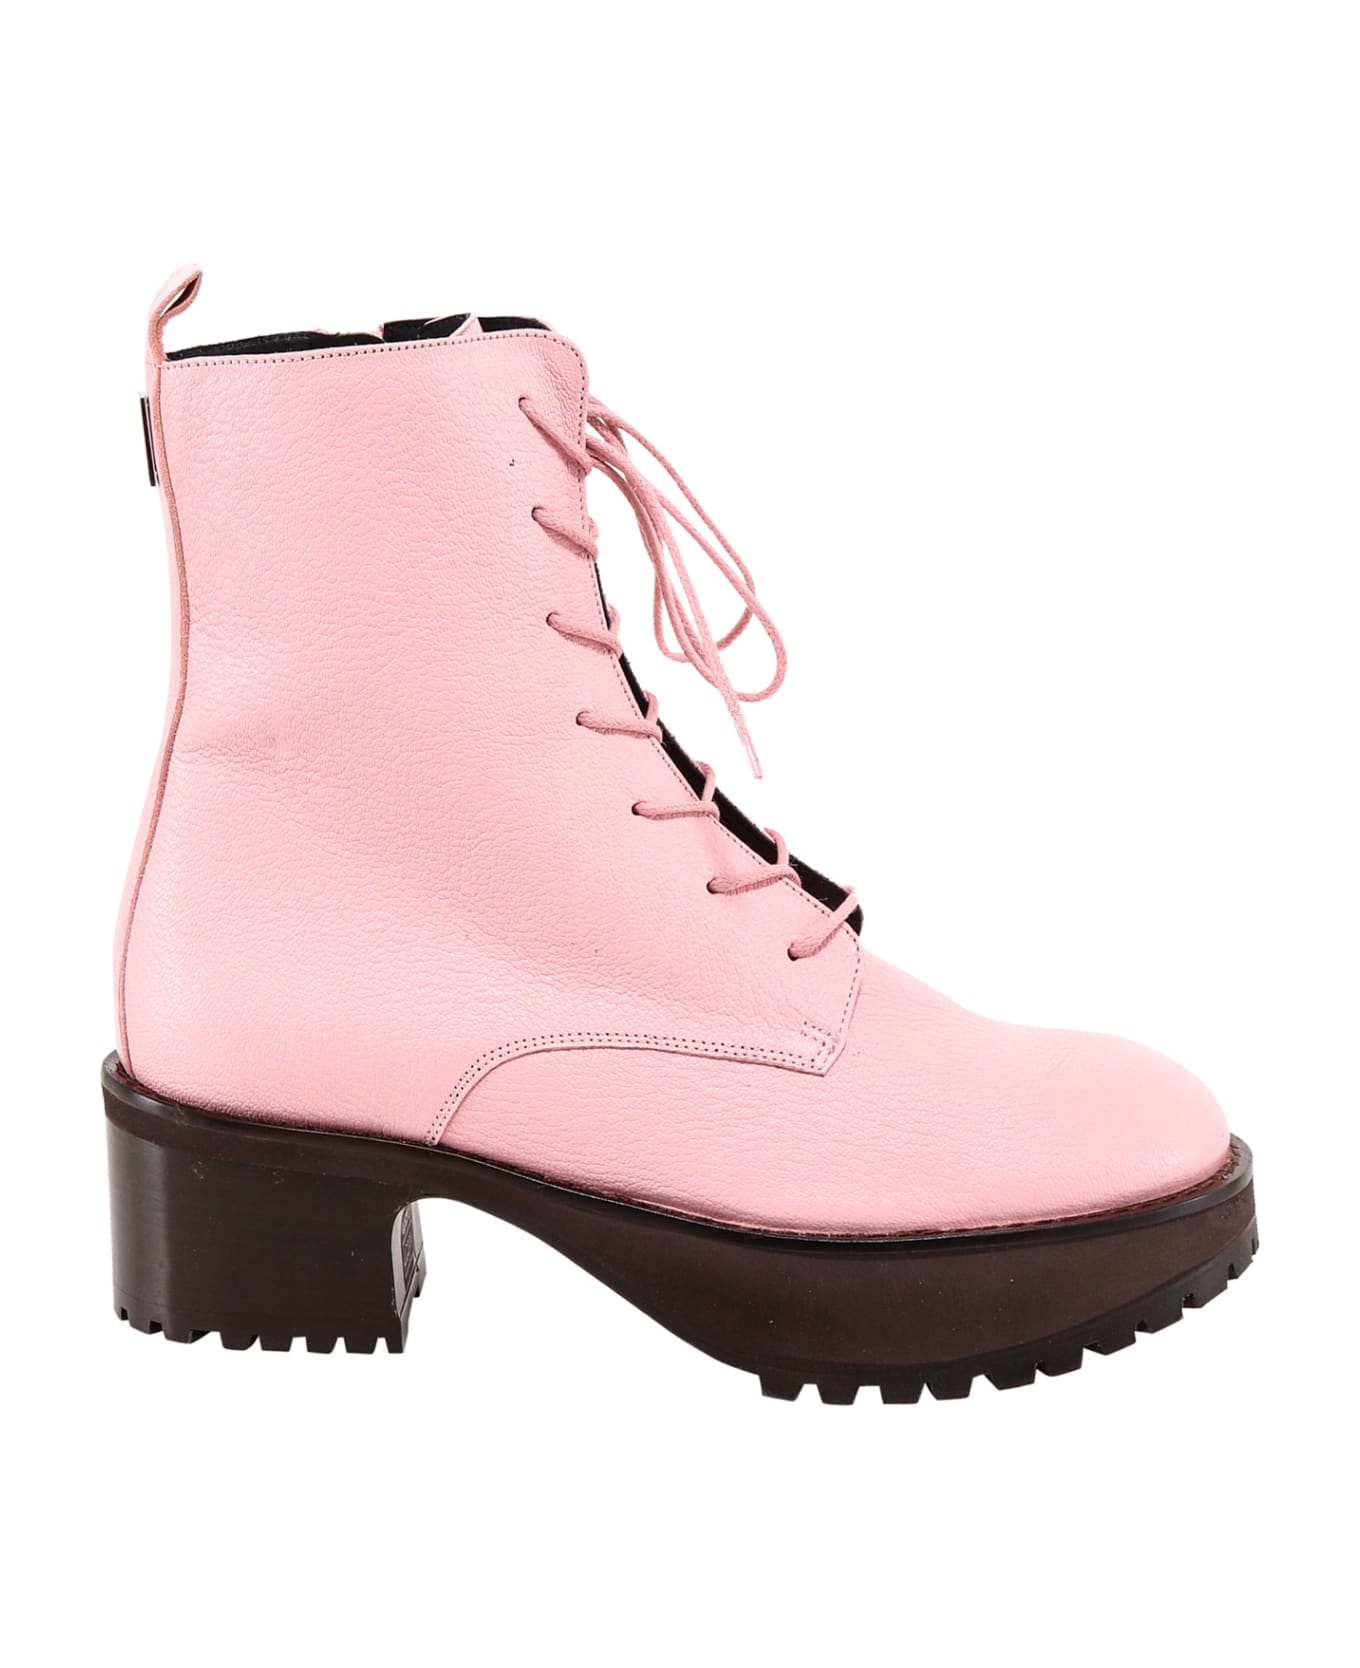 BY FAR Ankle Boots - Pink